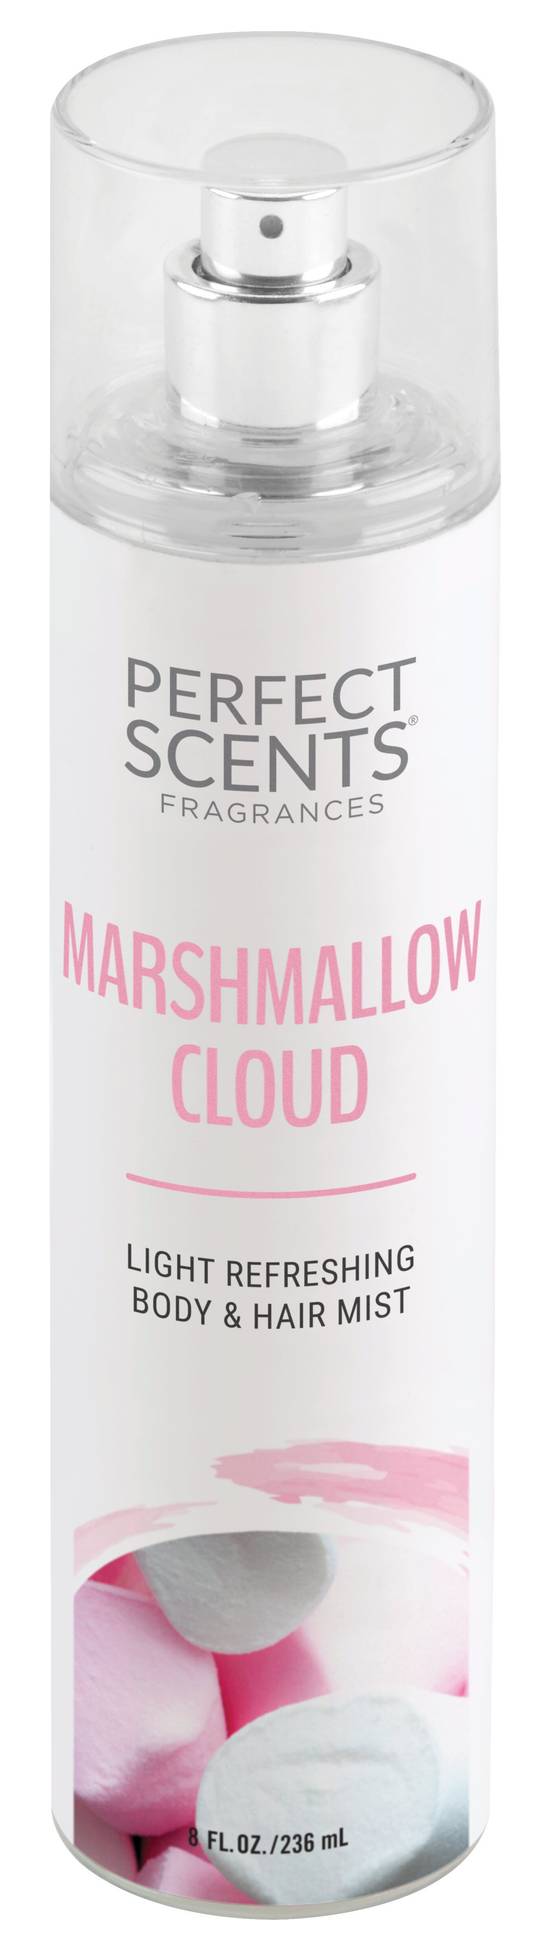 Perfect Scents Marshmallow Cloud Body & Hair Mist, 8 OZ